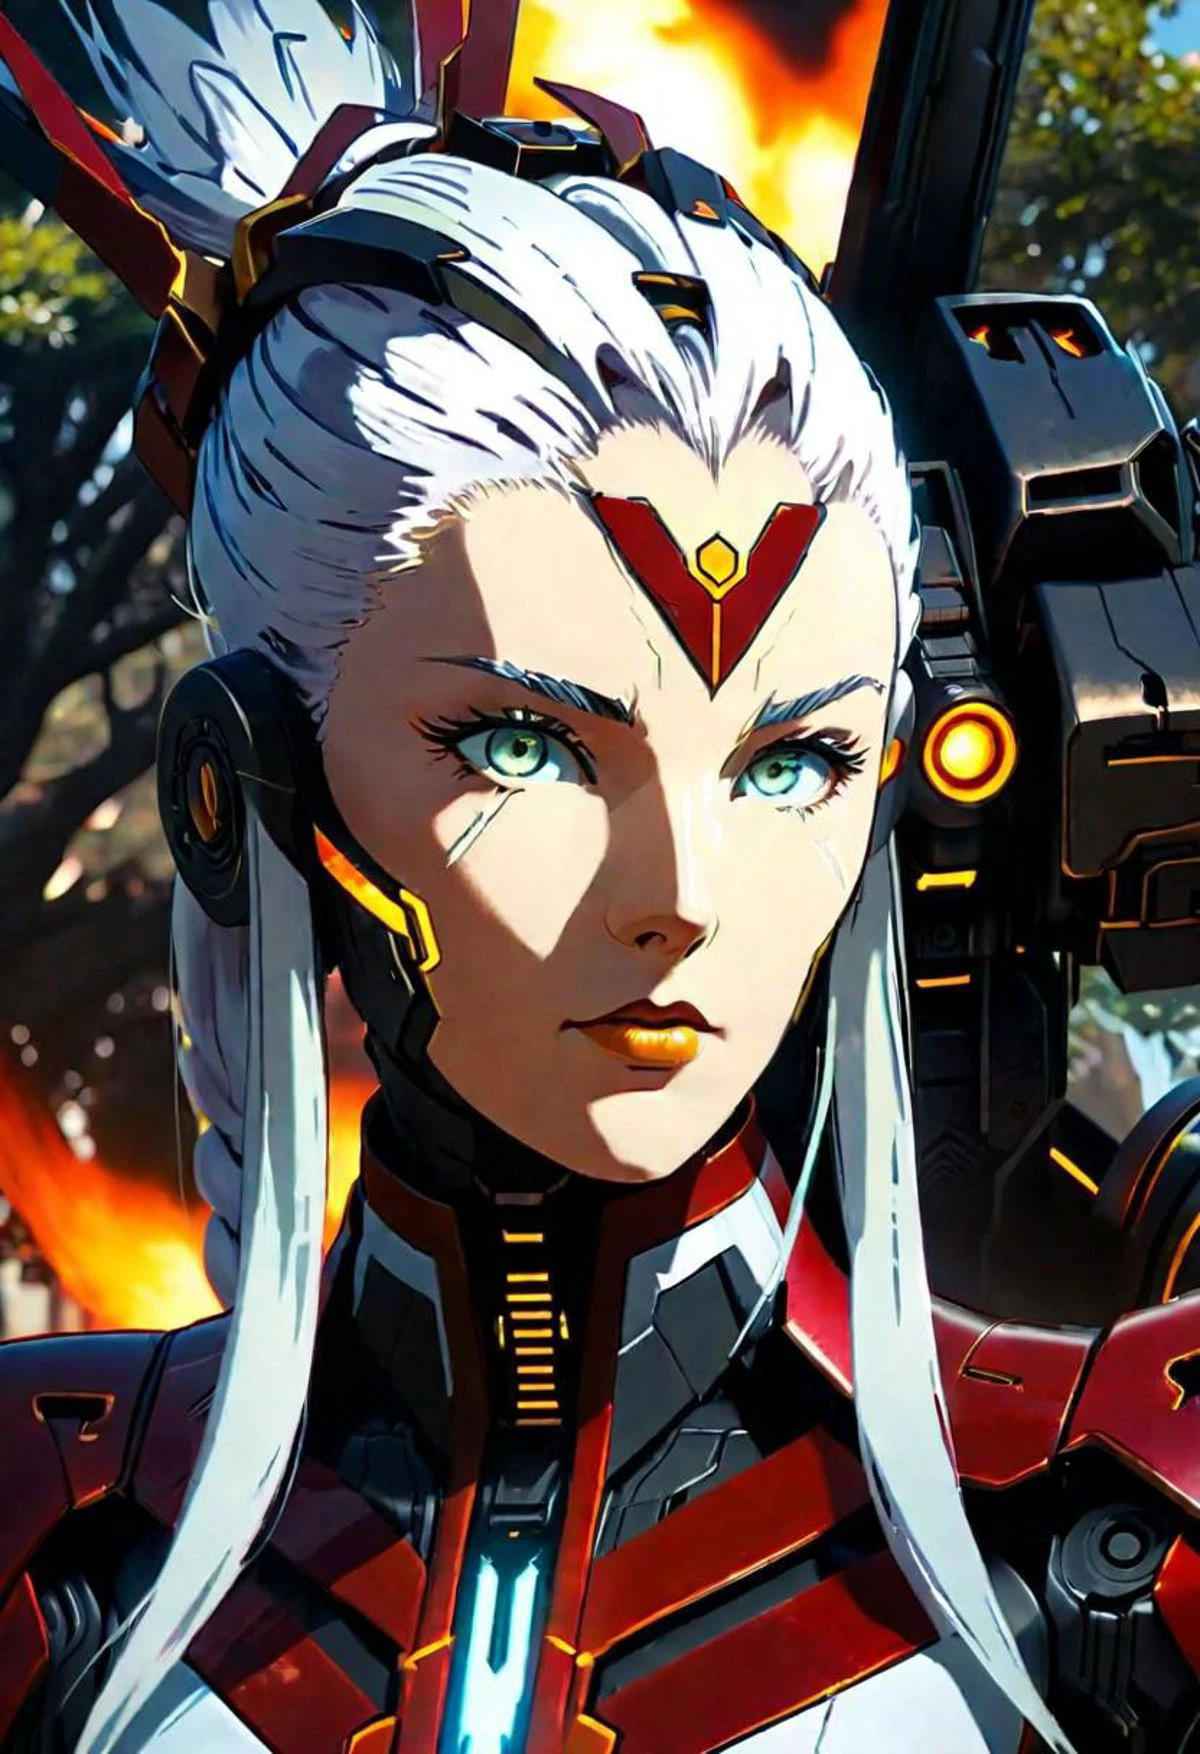 anime game, close up, a beautiful woman with white face and white hair in a braid and red forehead ribbon, she is wearing a white futuristic darkness god radiance god mech armor burning and smoking destroyed radiance boss golden Titan Cyberpunk Venom Evangelion mech wreck with red trim, she is standing, sunlit, weak lights and shadows, tree canopy